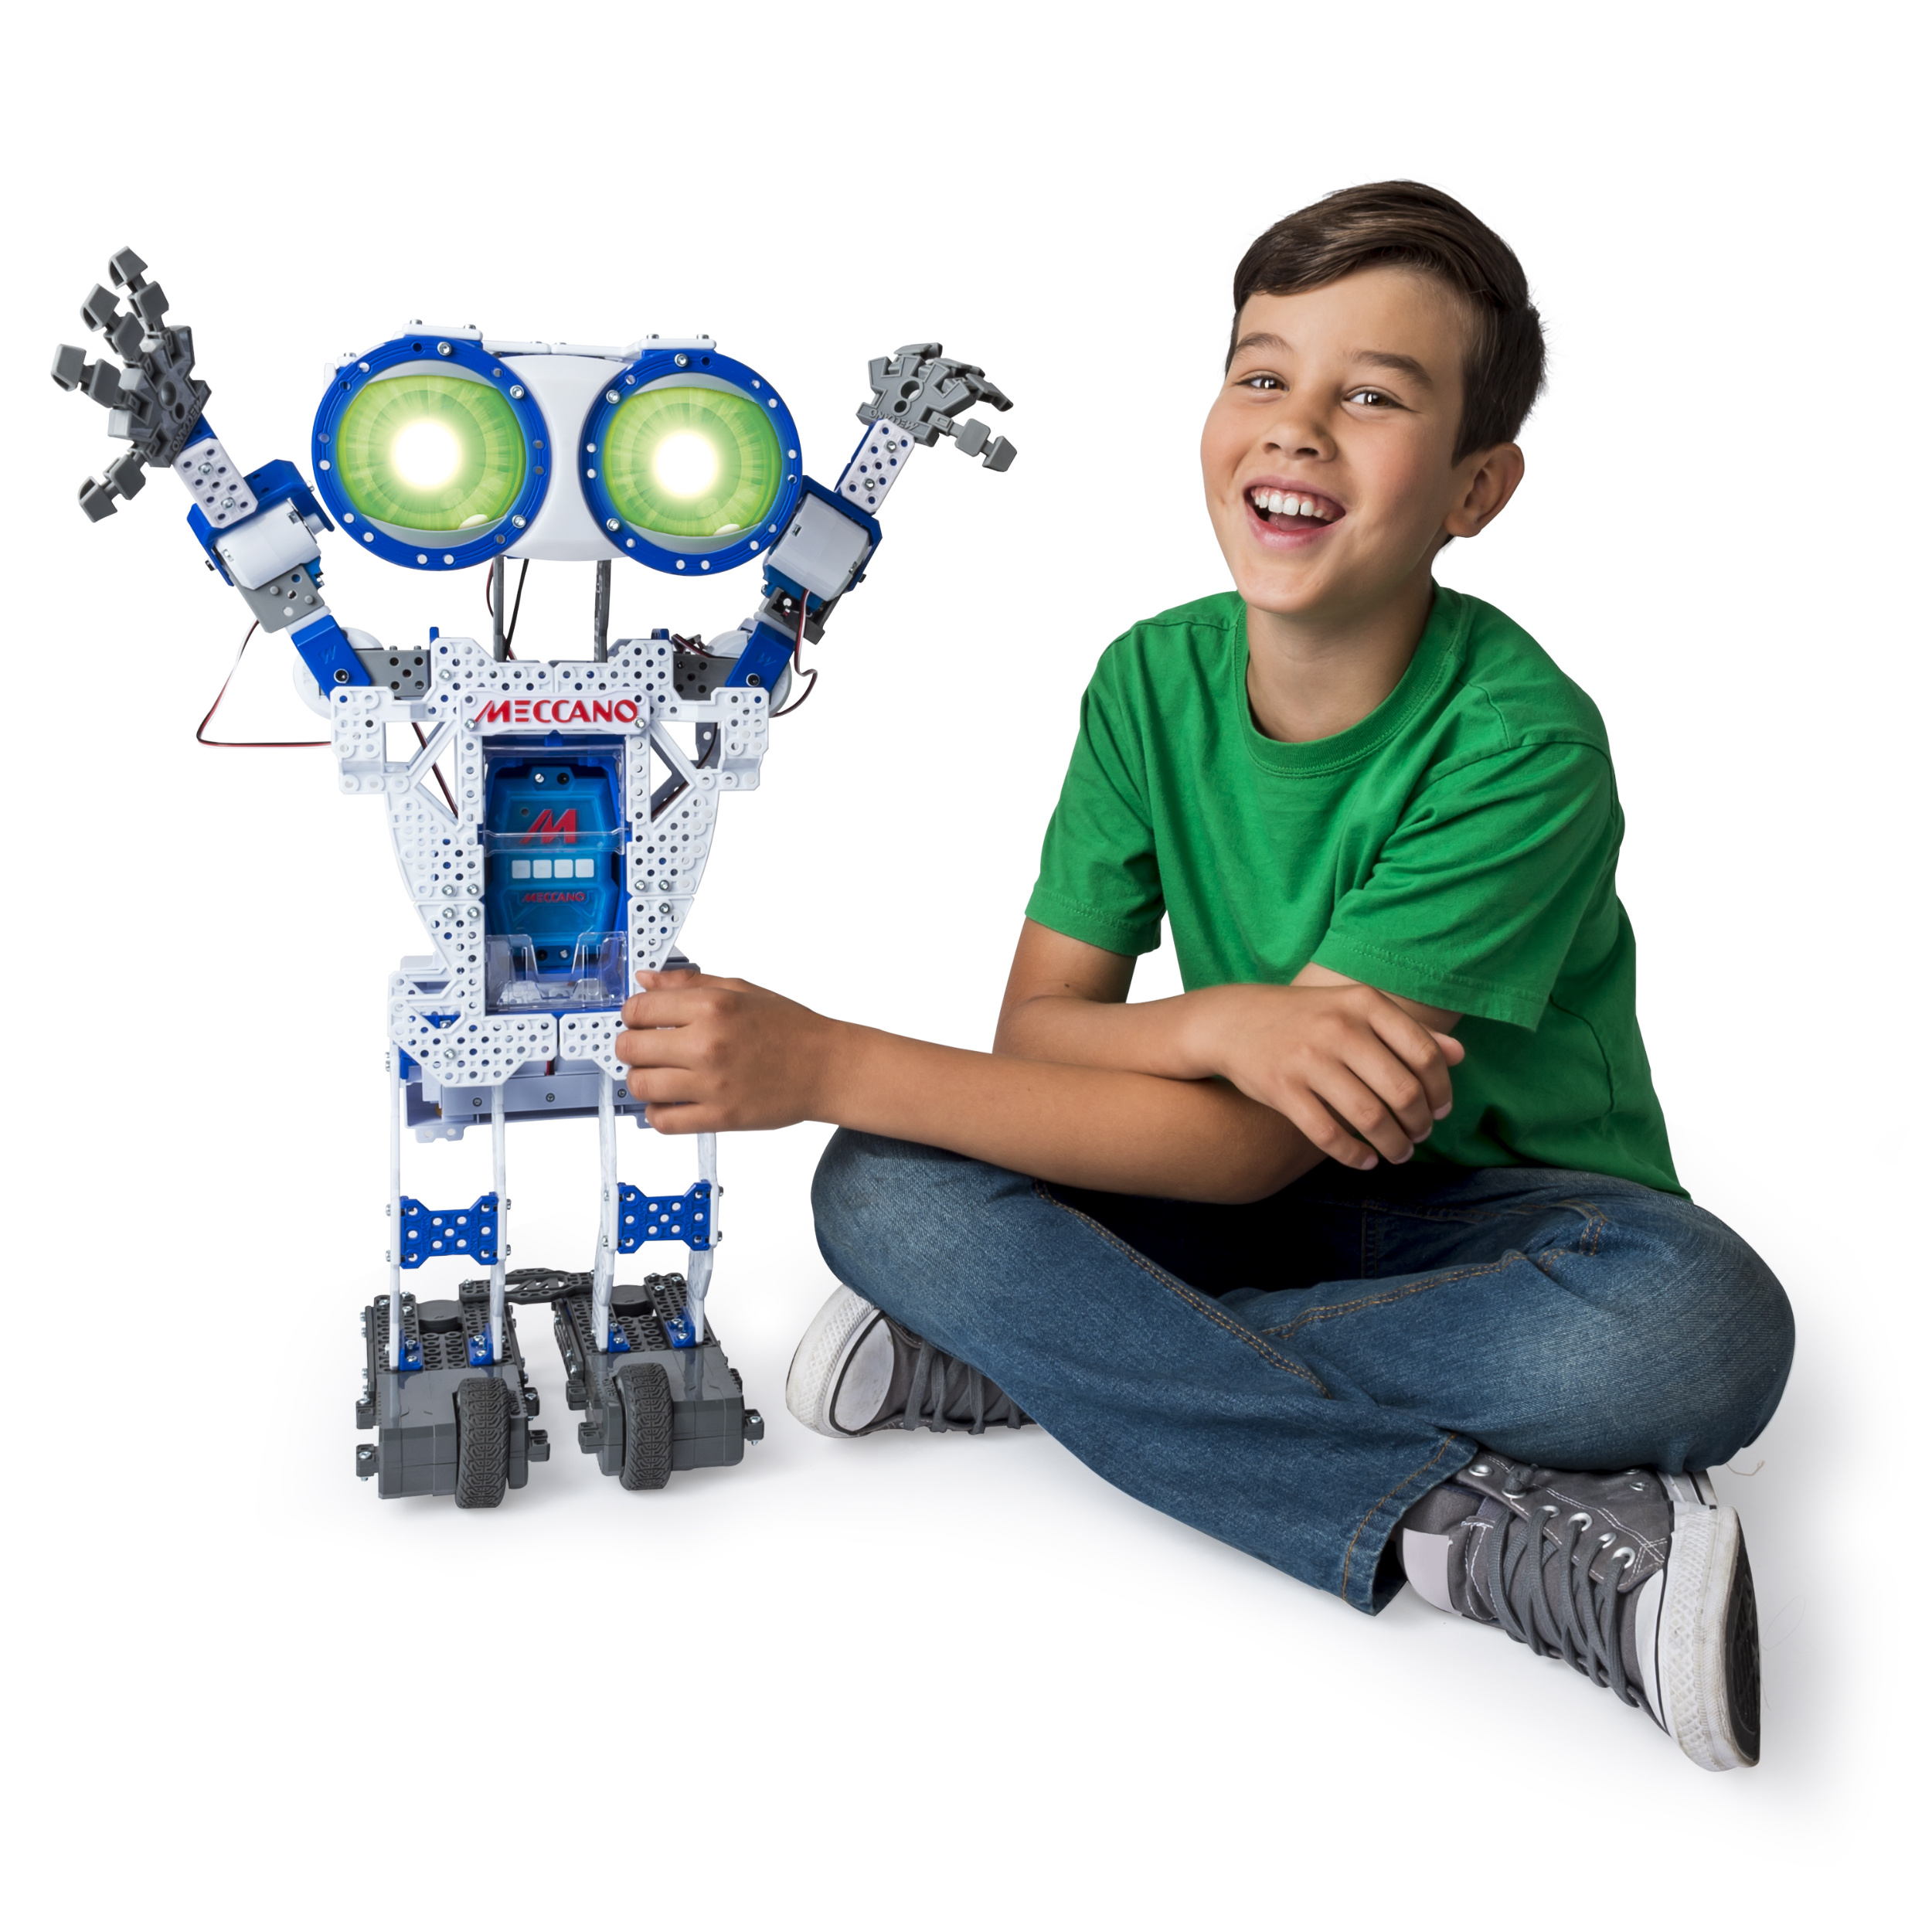 Meccano by Erector, Meccanoid 2.0 Robot-Building Kit STEM Engineering Education Toy - image 3 of 8